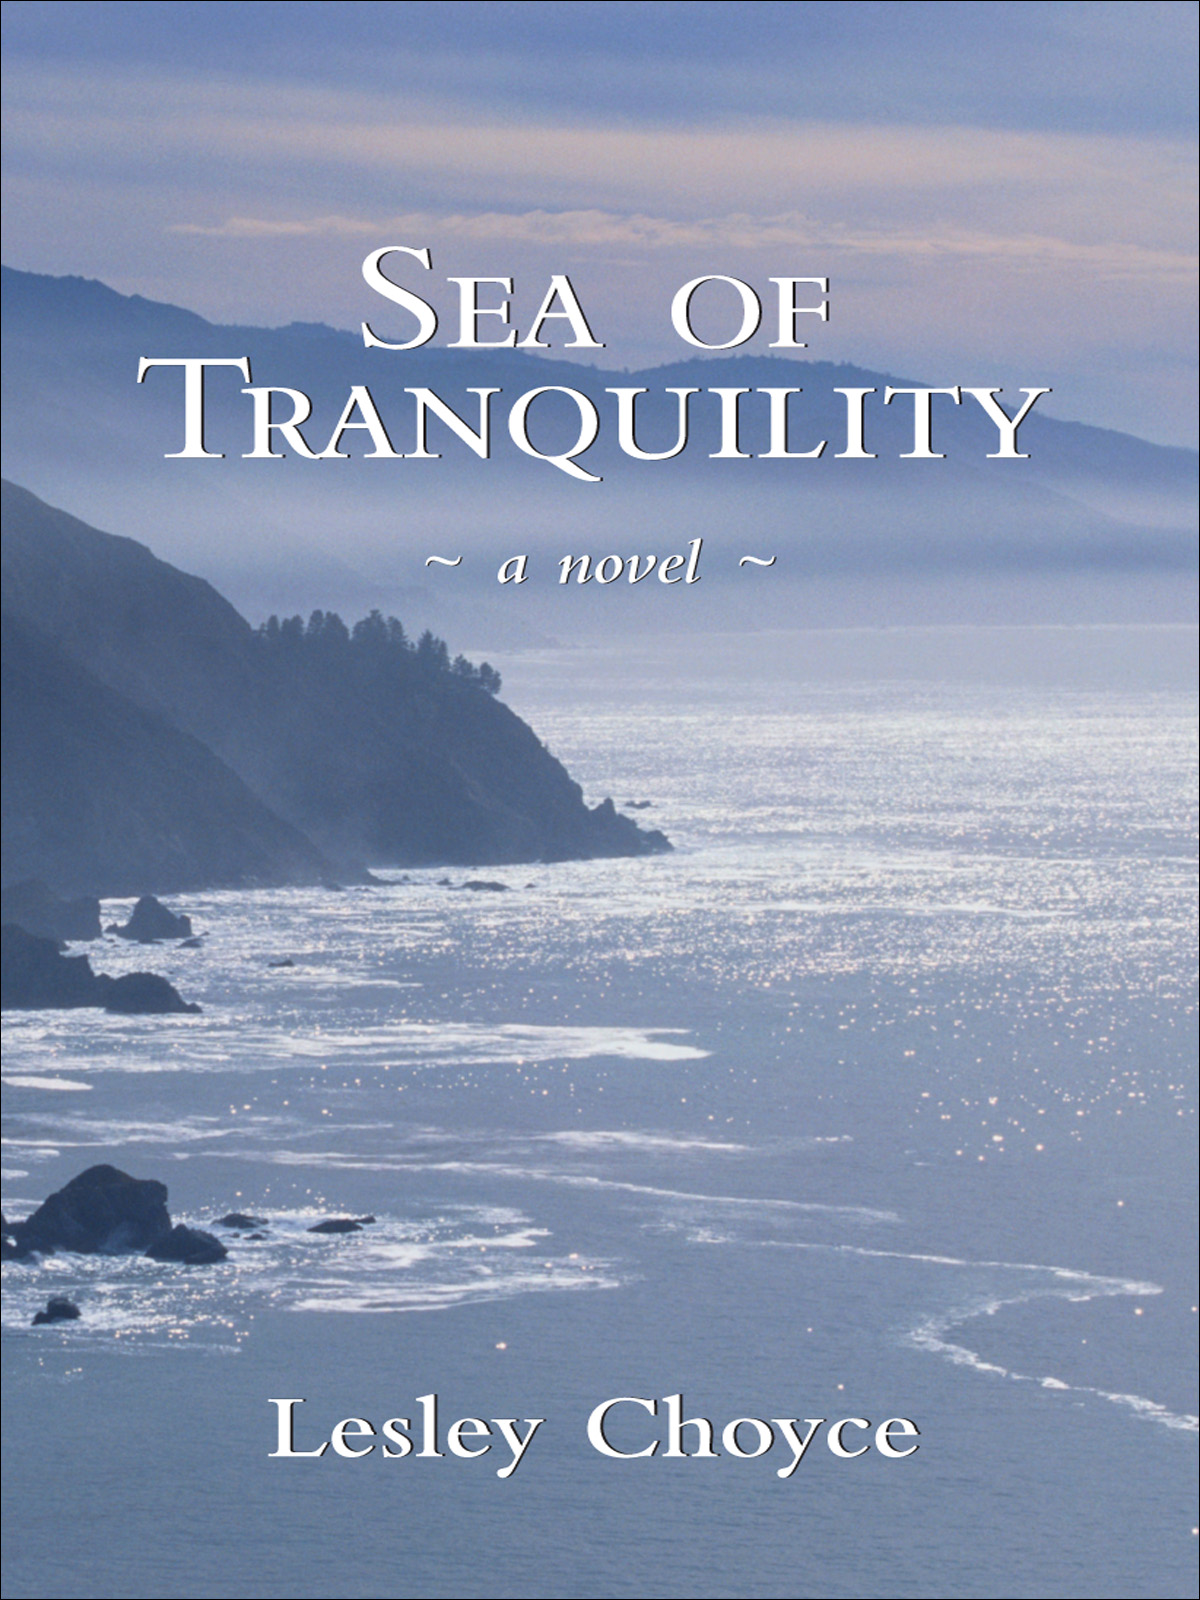 Sea of Tranquility (2003) by Lesley Choyce